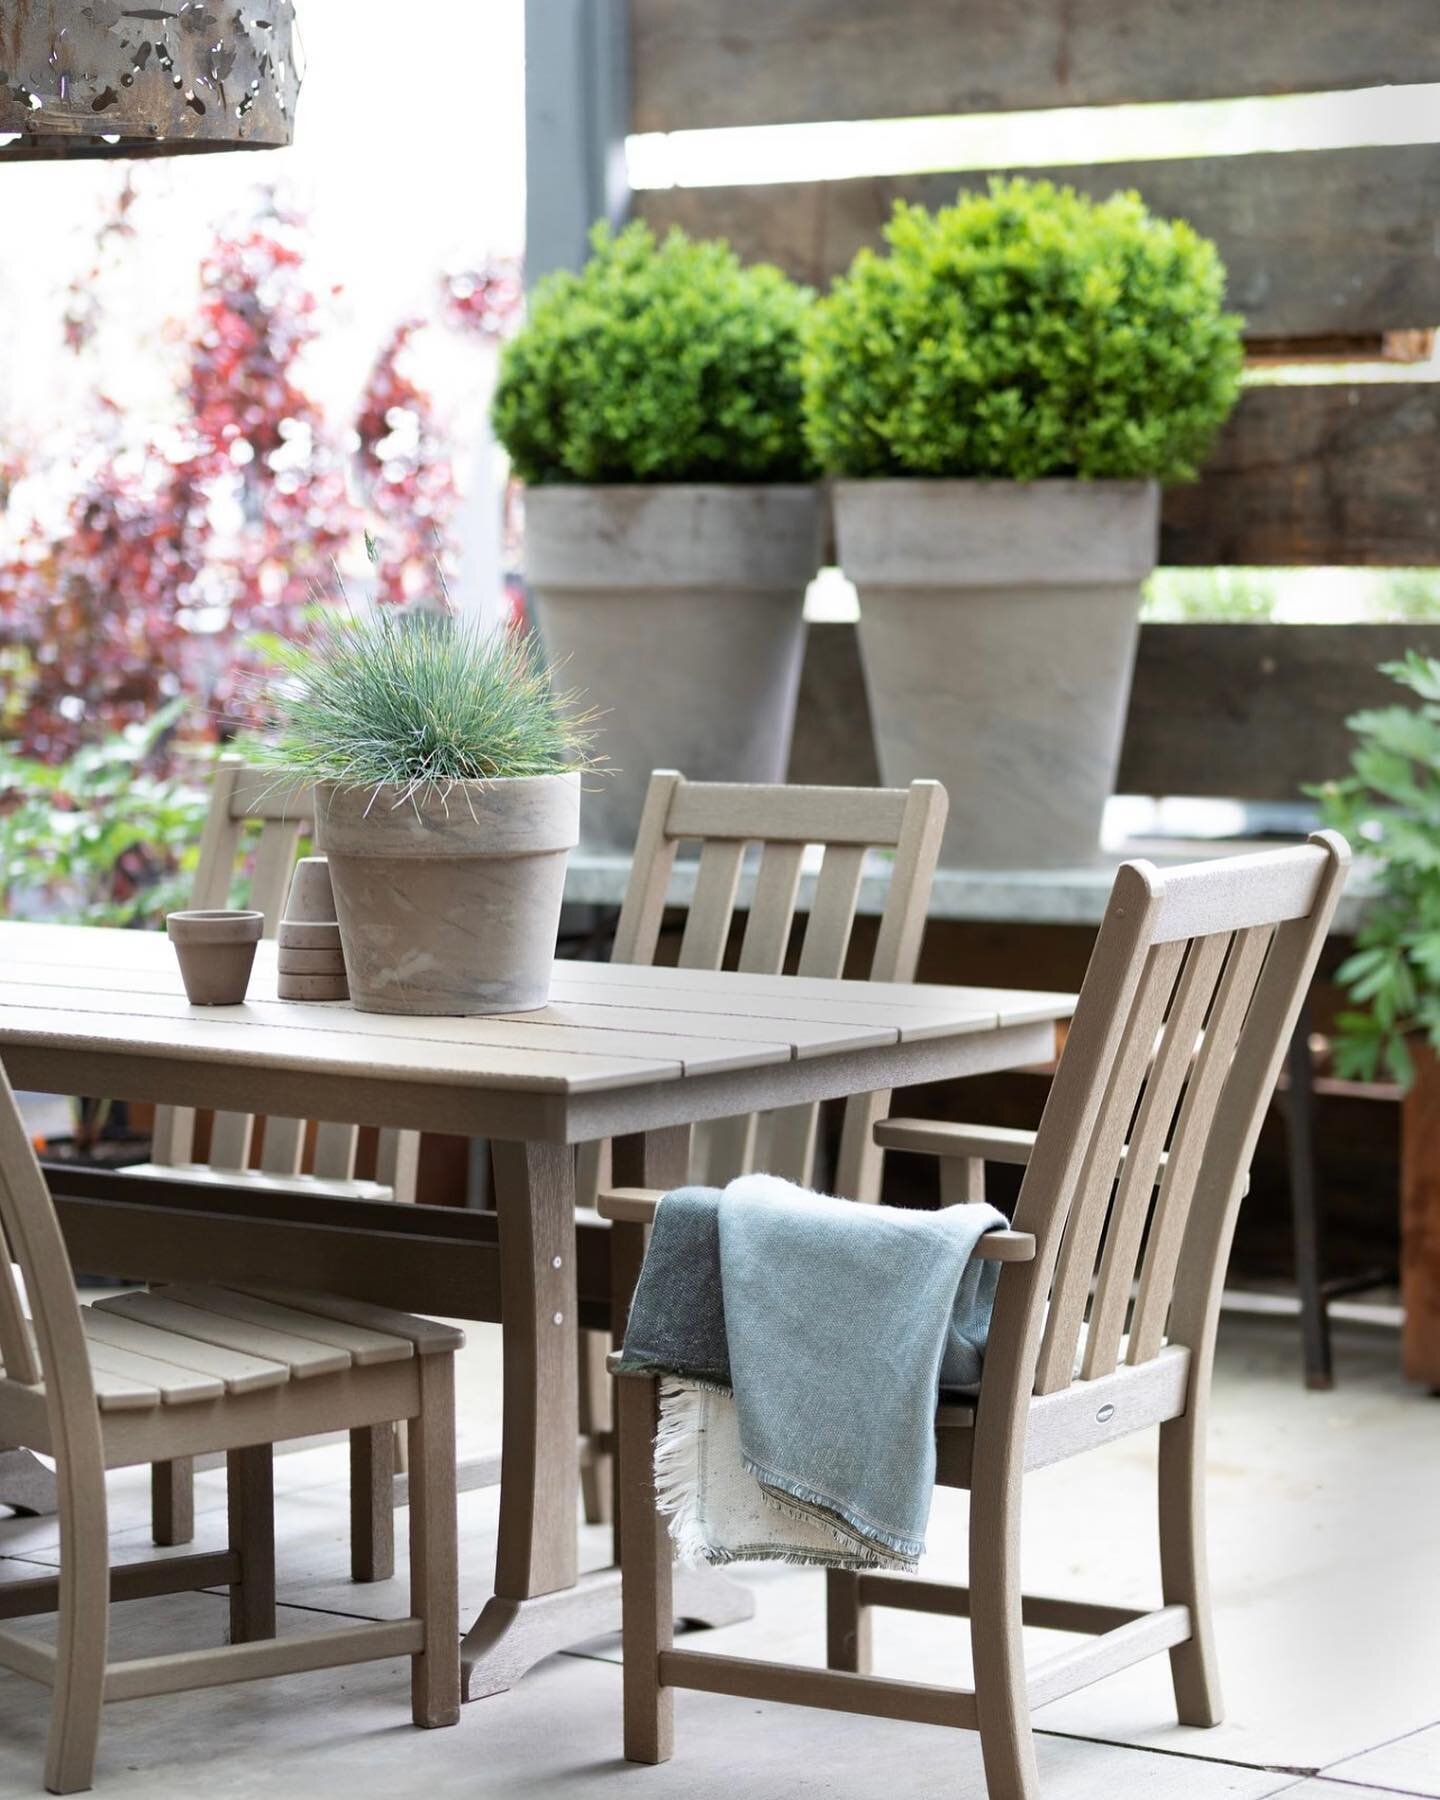 There is such thing as the perfect outdoor table. Shop our @polywood showroom today. #madeinamerica

#madeintheusa #outdoorstyle #outdoorfurniture #patiofurniture #dundeegardens #sustainability #sustainablefurniture #shopsmall #shopnepa #smallbusines